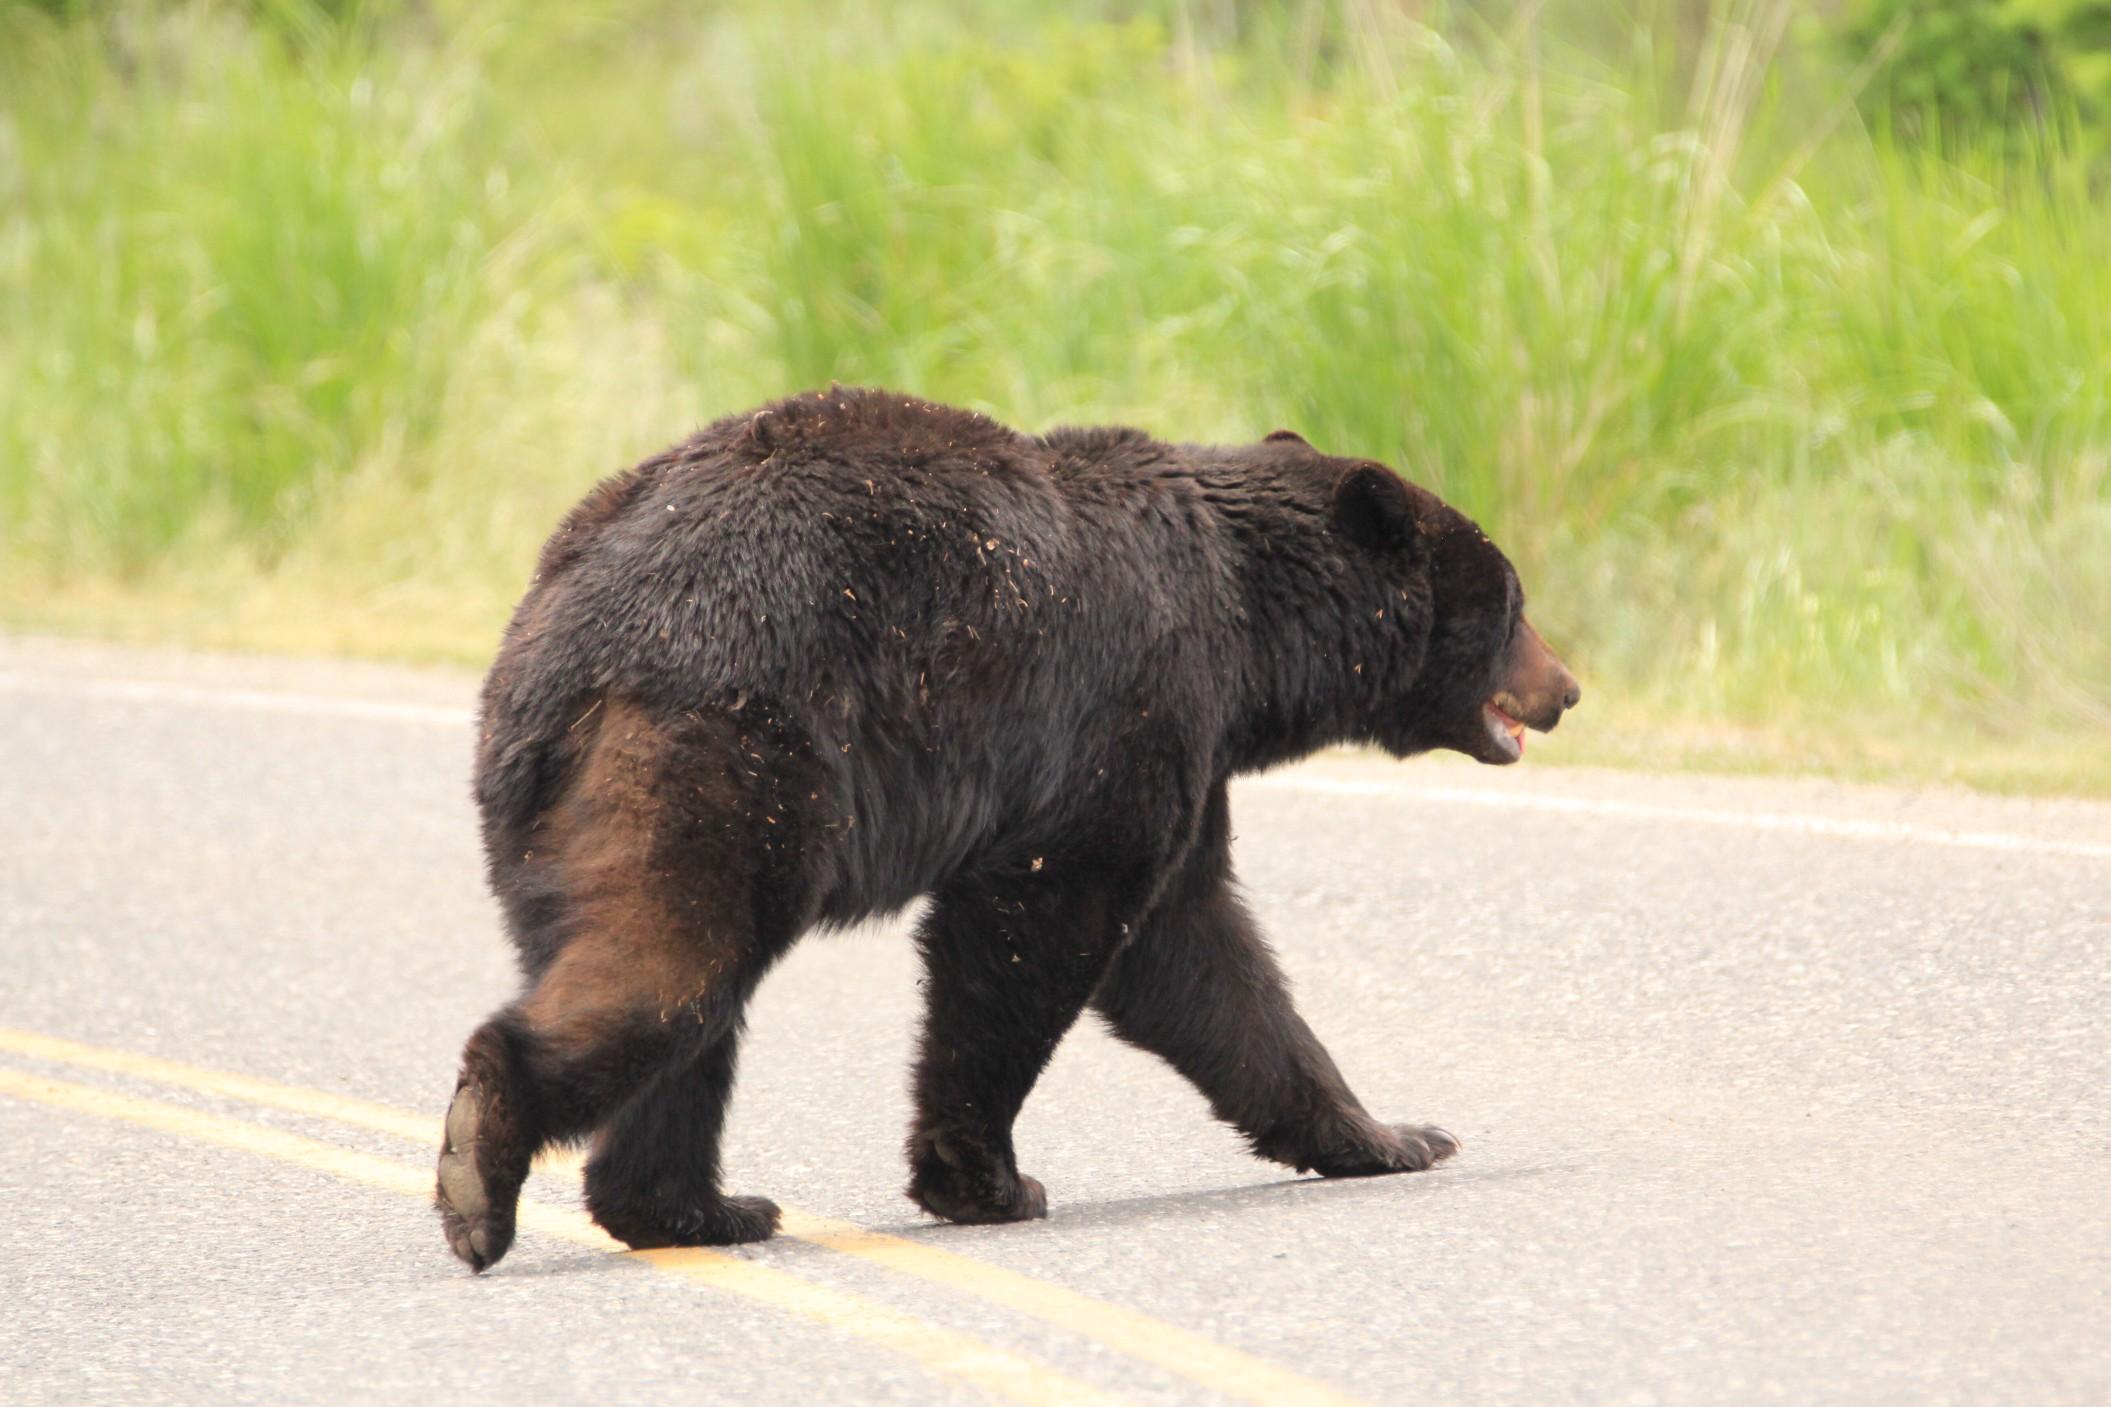 Black bears have been coming in closer contact with humans over the years.